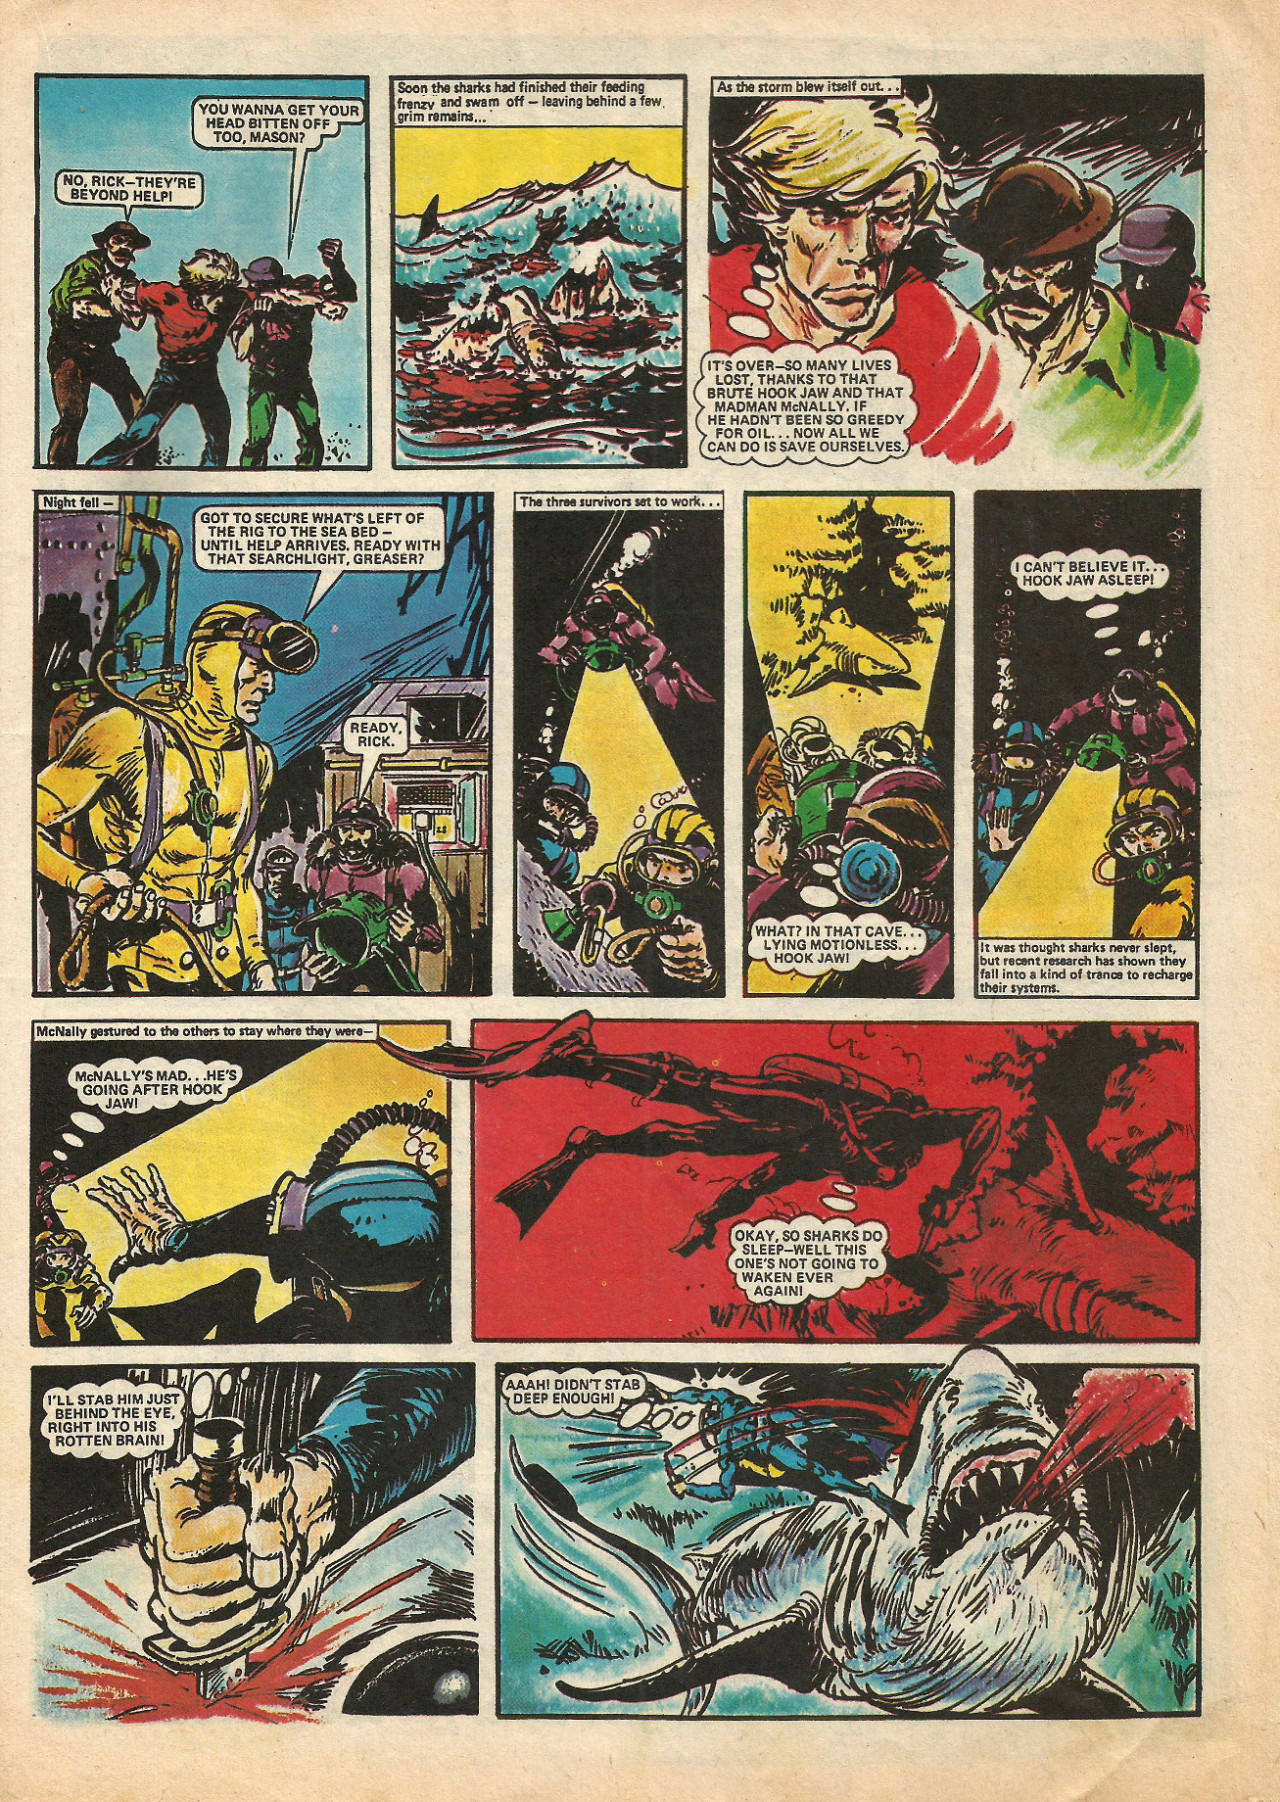 Hook Jaw, from Action comic 10th April, 1976. (IPC Magazines).From 30th Century Comics,